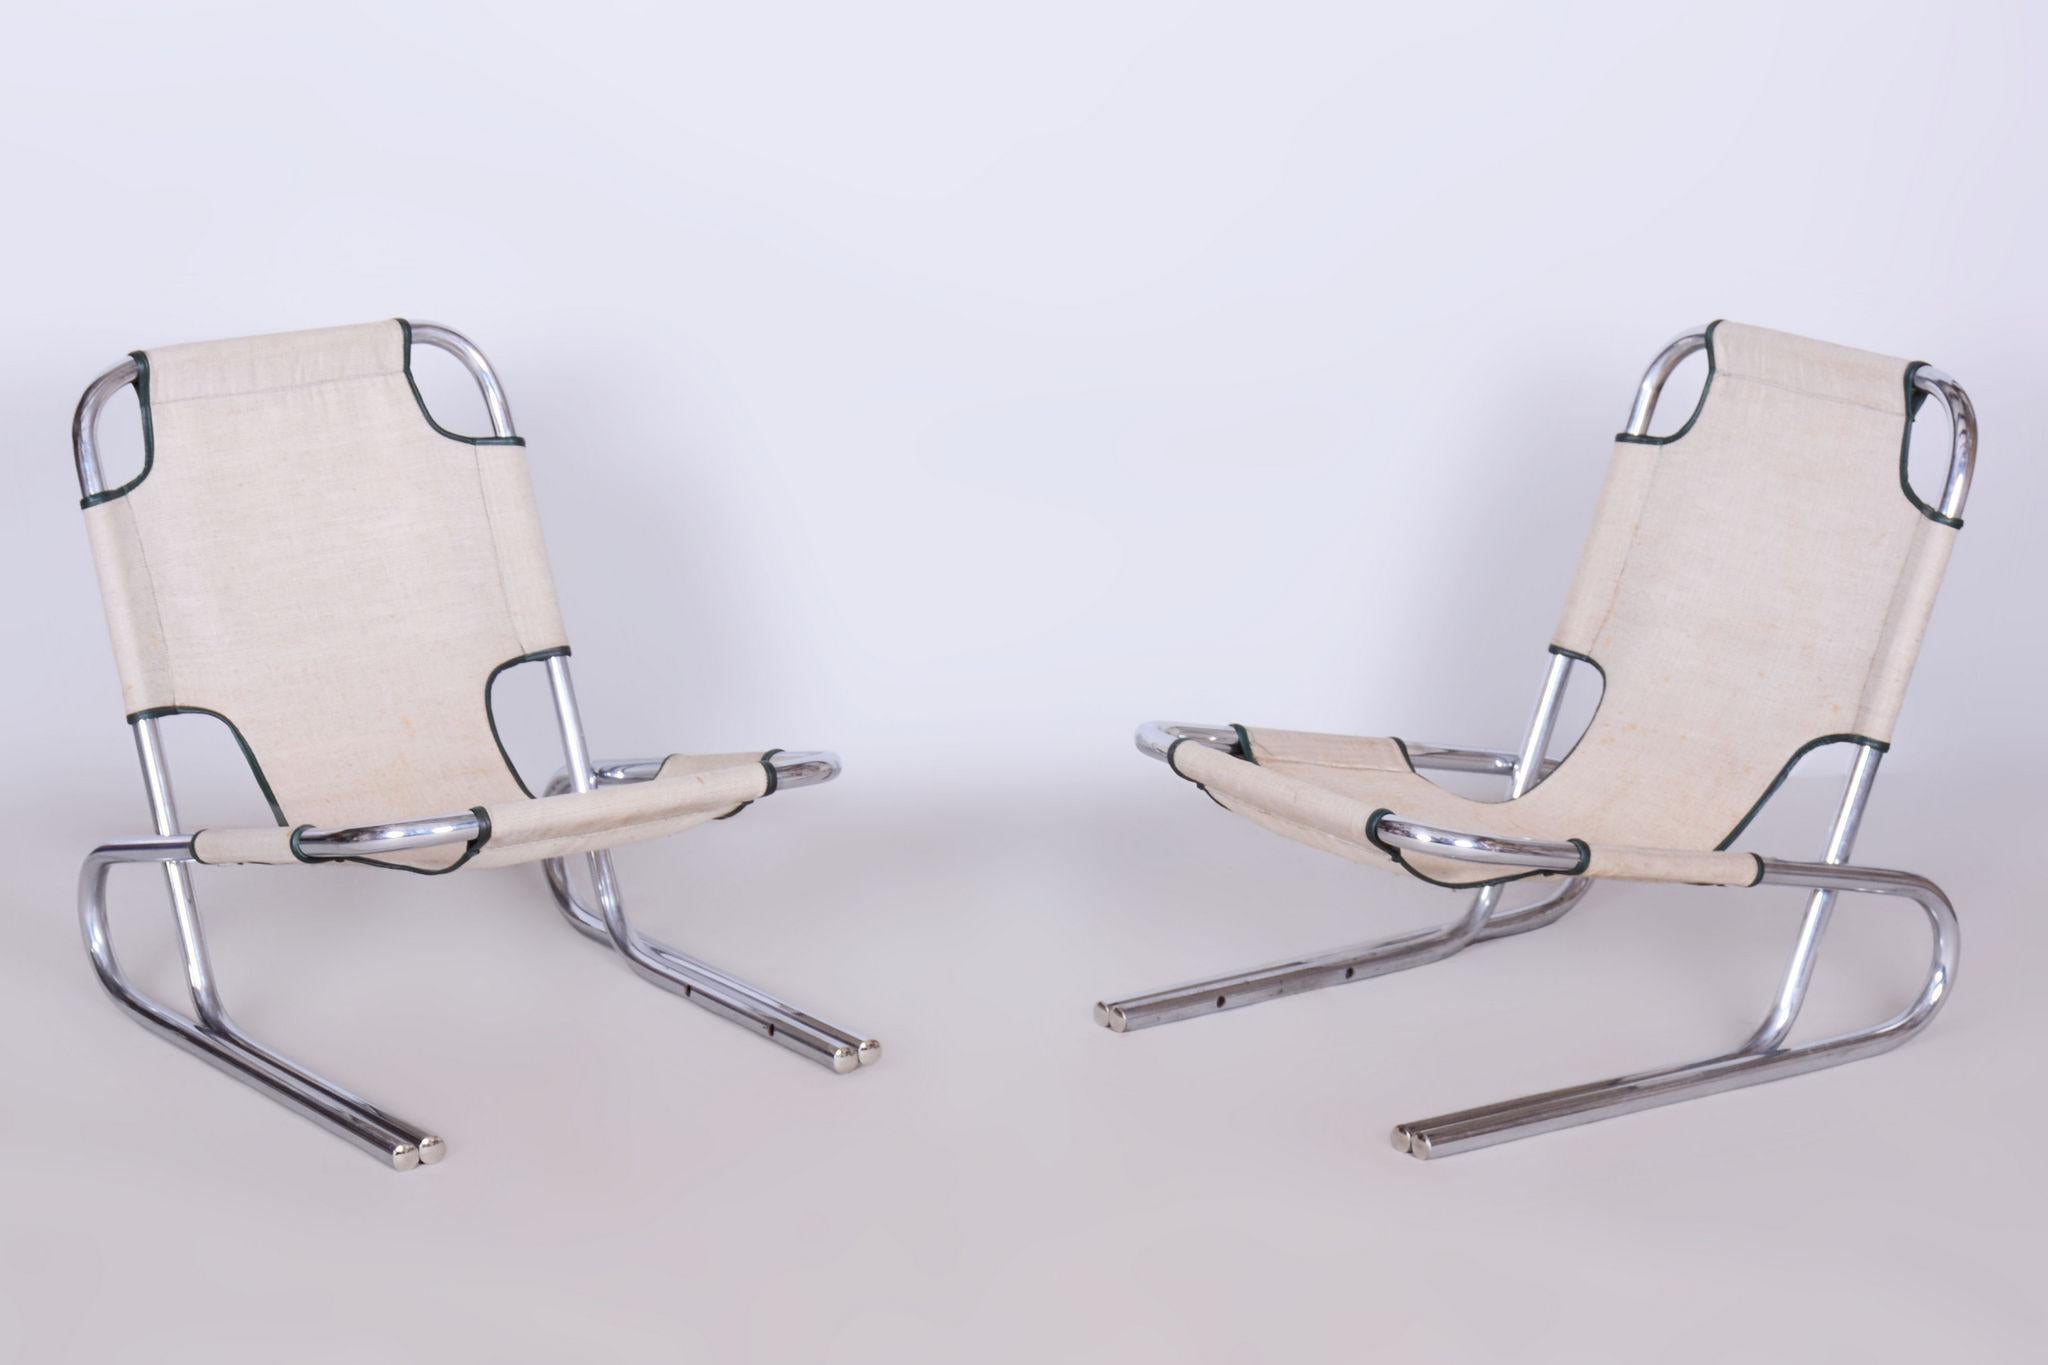 Set of Two Original Bauhaus Armchairs, Chrome-Plated Steel, Germany, 1940s In Good Condition For Sale In Horomerice, CZ